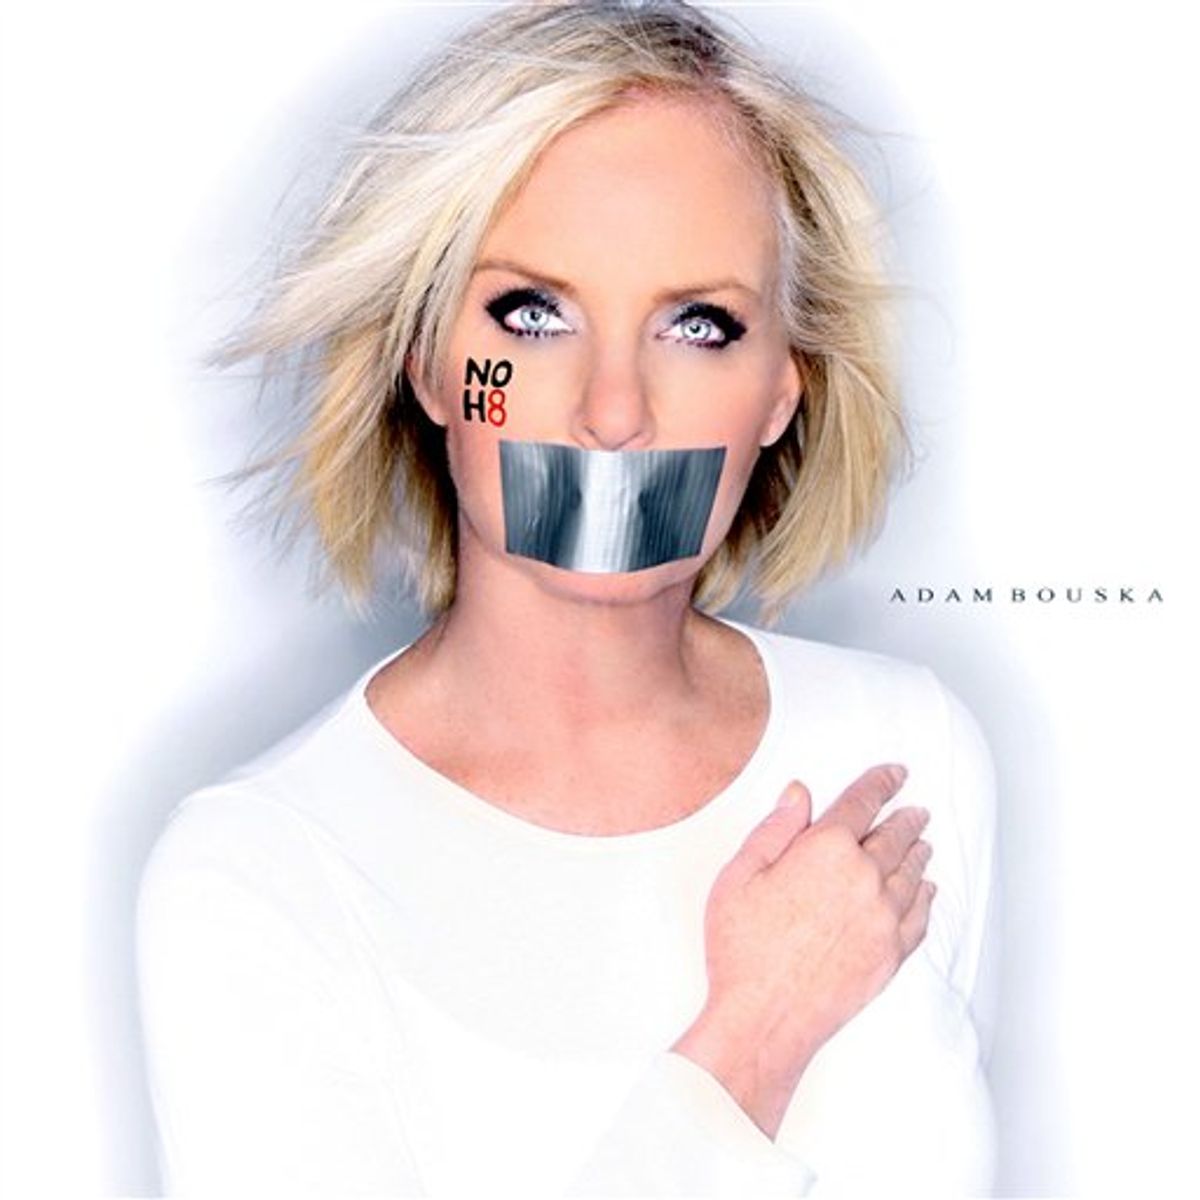 This undated image provided by Adam Bouska/NOH8 Campaign shows Cindy McCain, the wife of Sen. John McCain, R-Ariz., posing for the NOH8 campaign. NOH8 is a gay rights group challenging Proposition 8 passed by California voters in 2008 banning same sex marriage.  (AP Photo/Adam Bouska/NOH8 Campaign)  NO SALES    (AP)